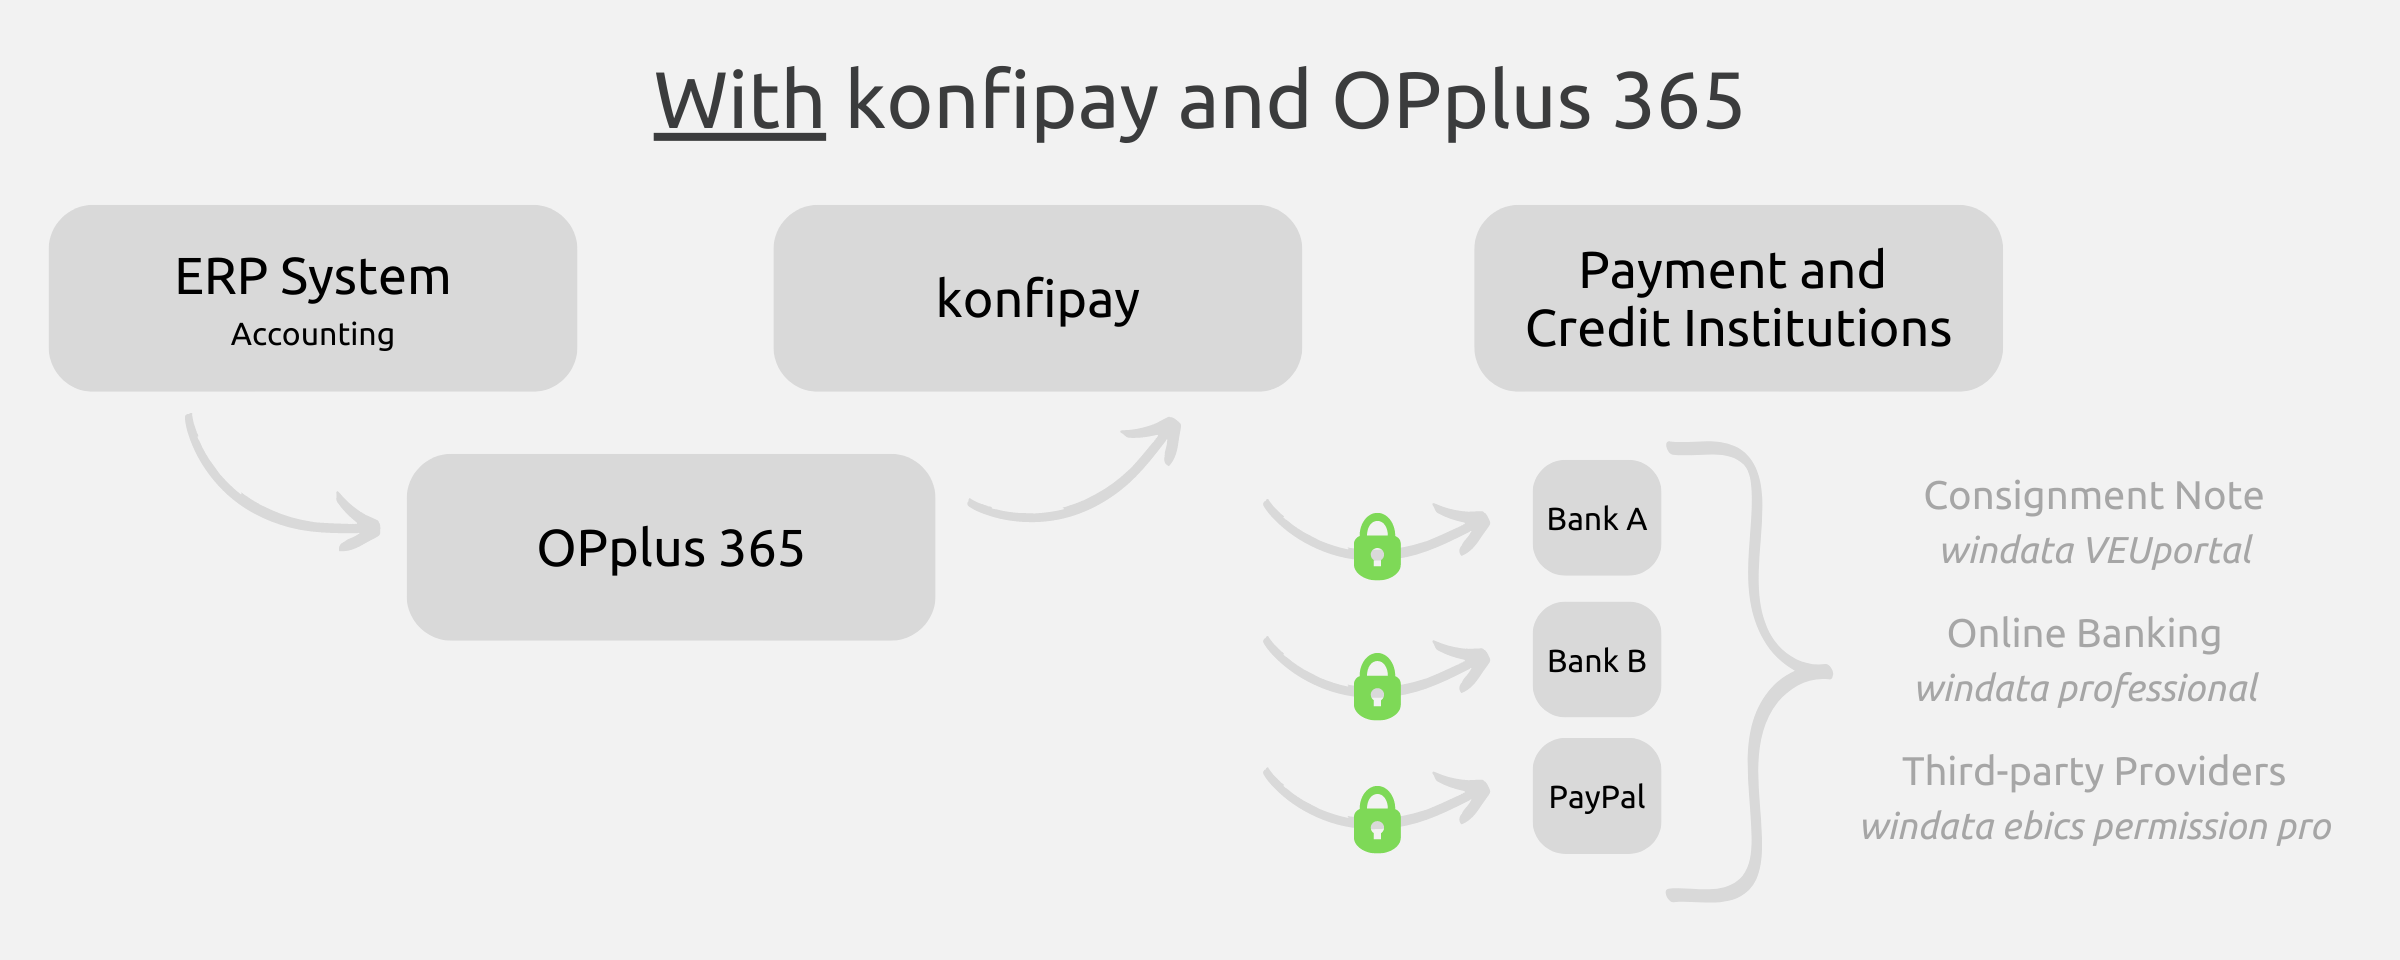 Bank Reconciliation with konfipay and OPplus